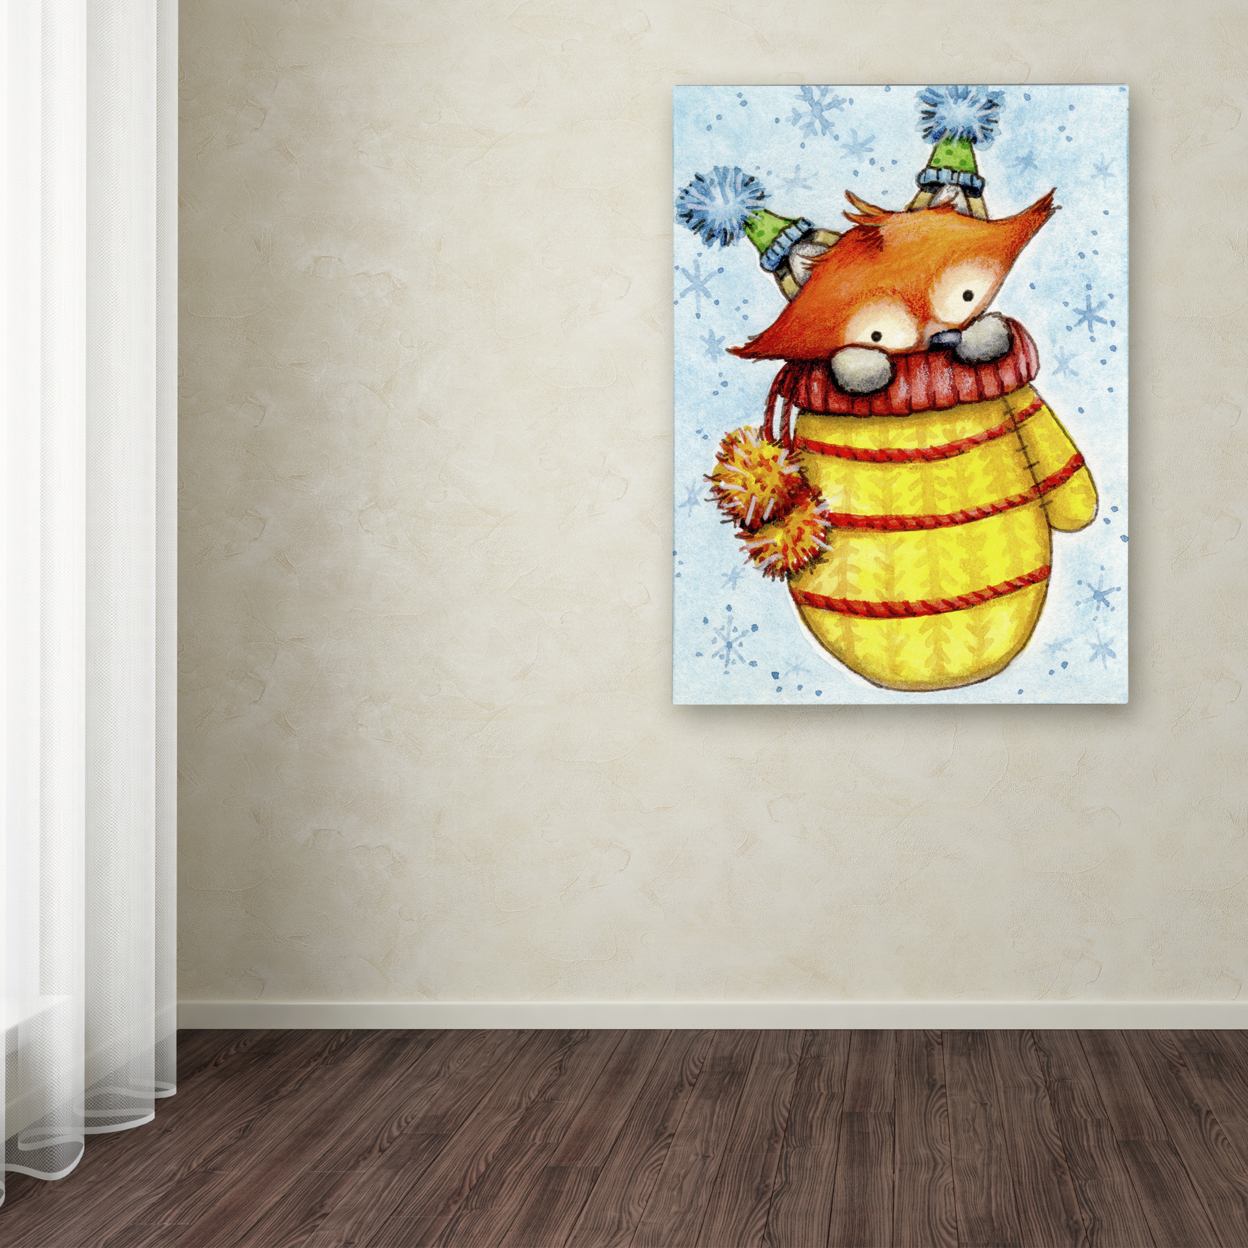 Jennifer Nilsson 'Warm And Snuggly' Canvas Wall Art 35 X 47 Inches